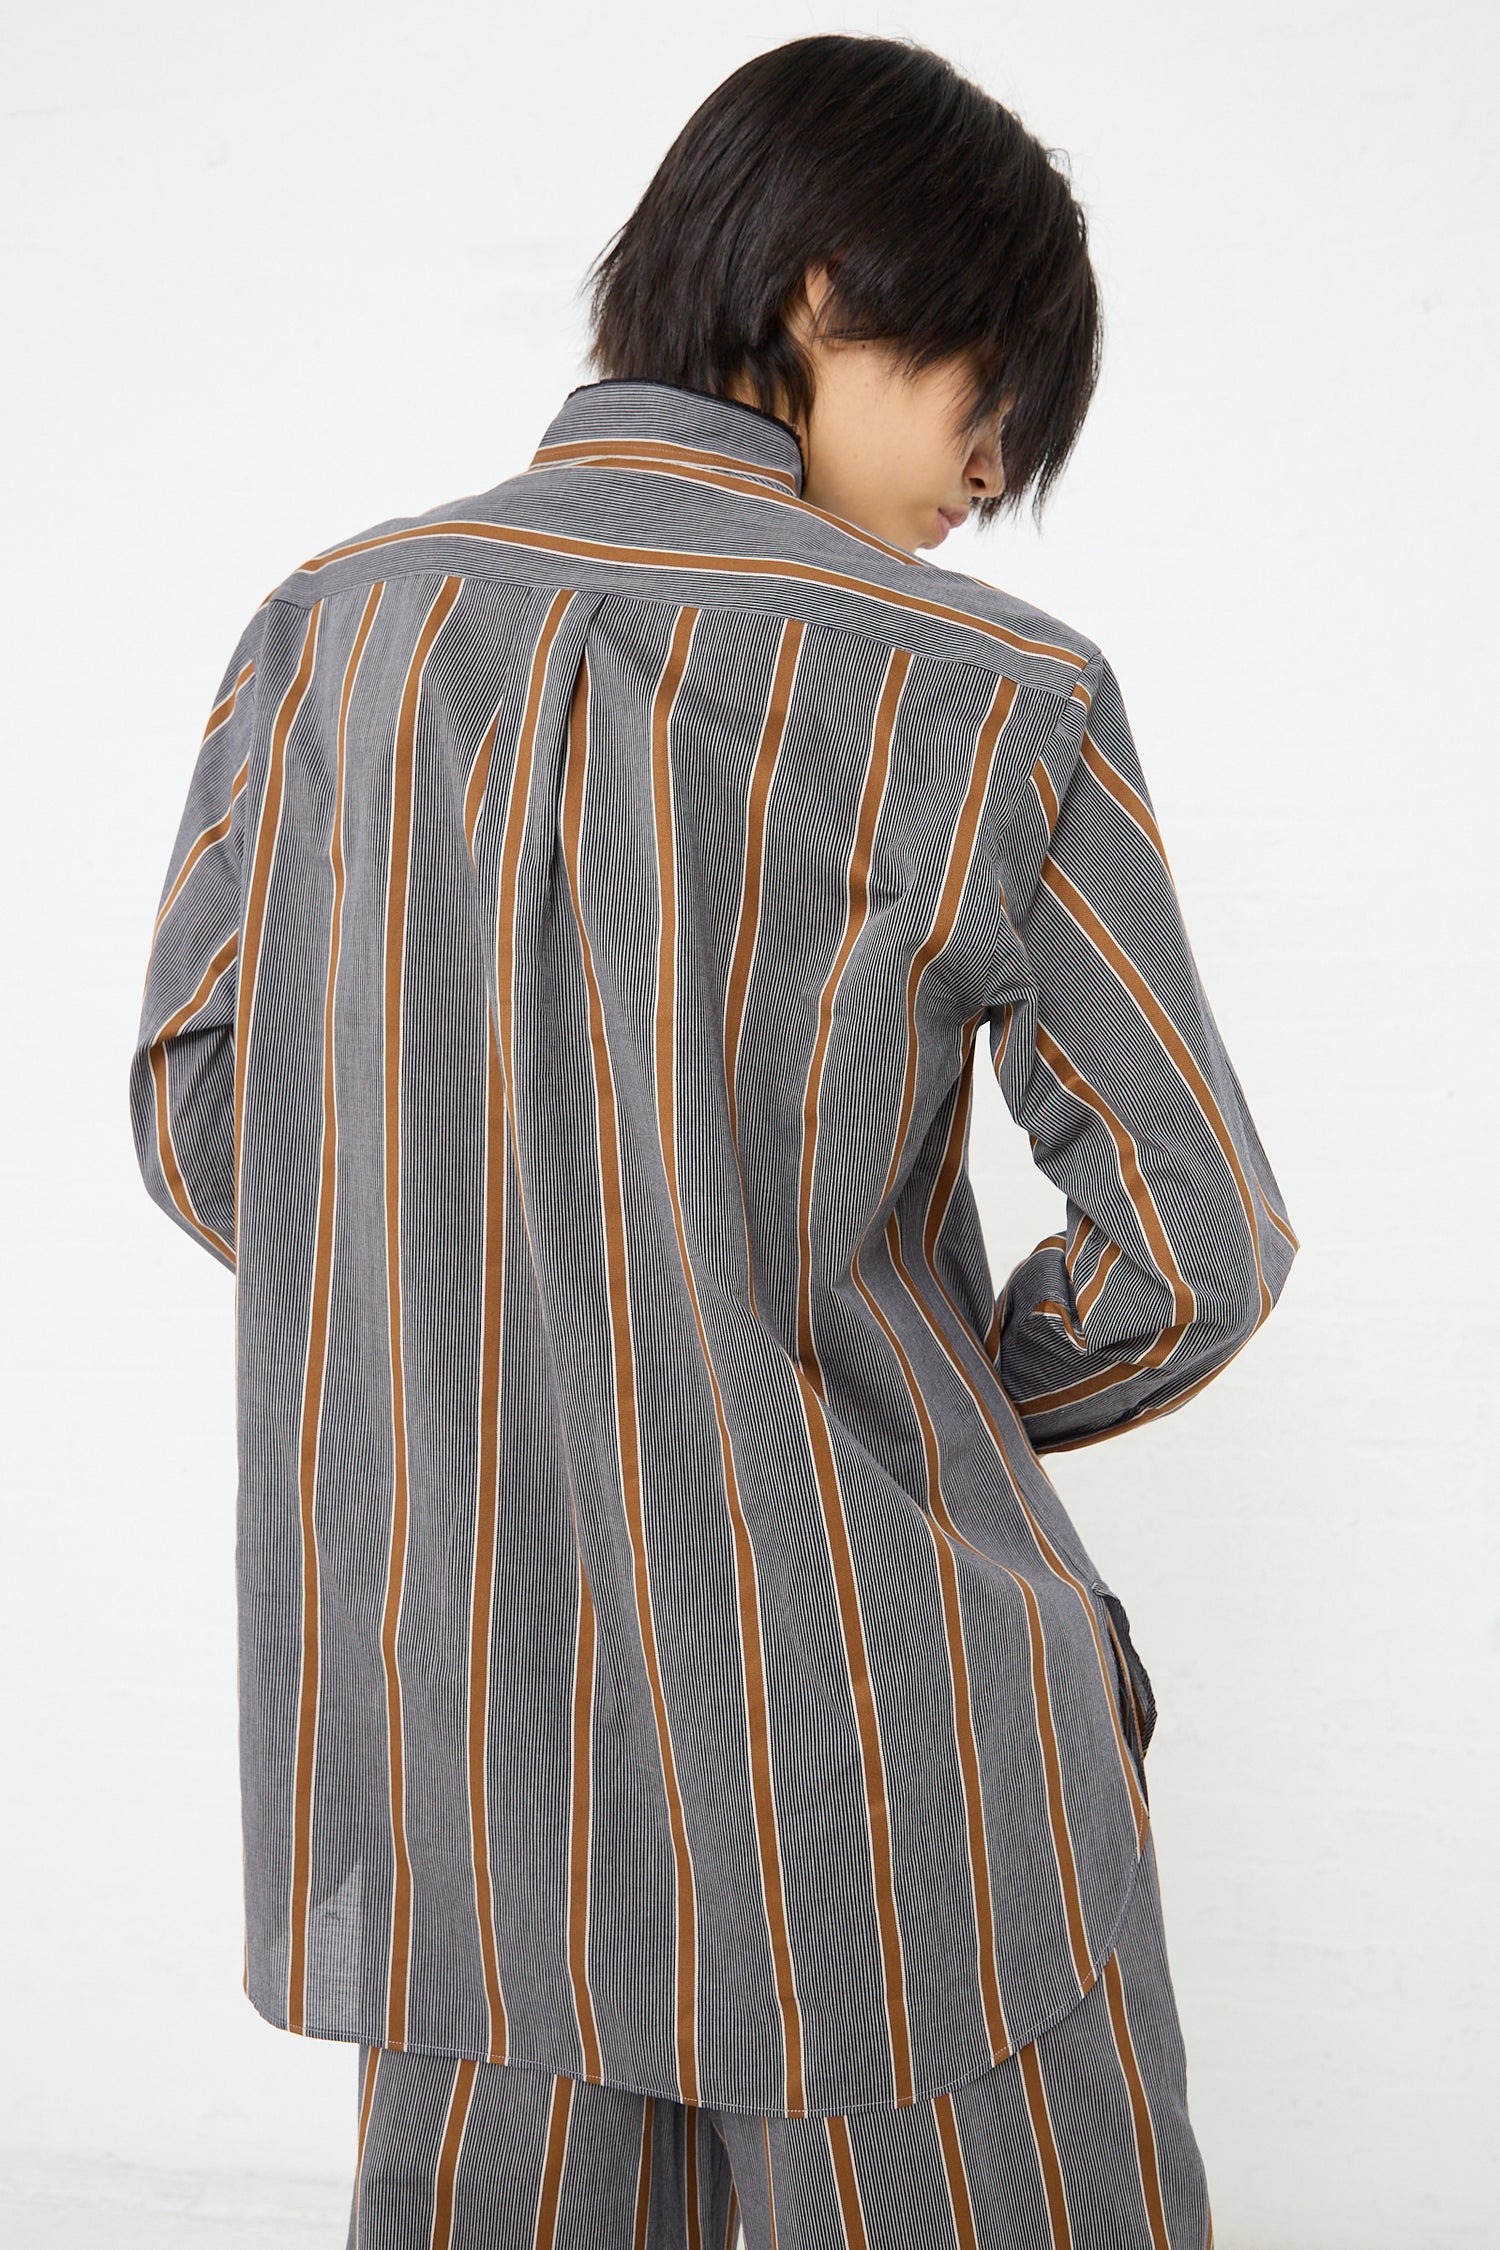 The back of a woman wearing a Mao Shirt with Fringed Collar in Striped Black and Noisette made of Japanese cotton from Cristaseya.